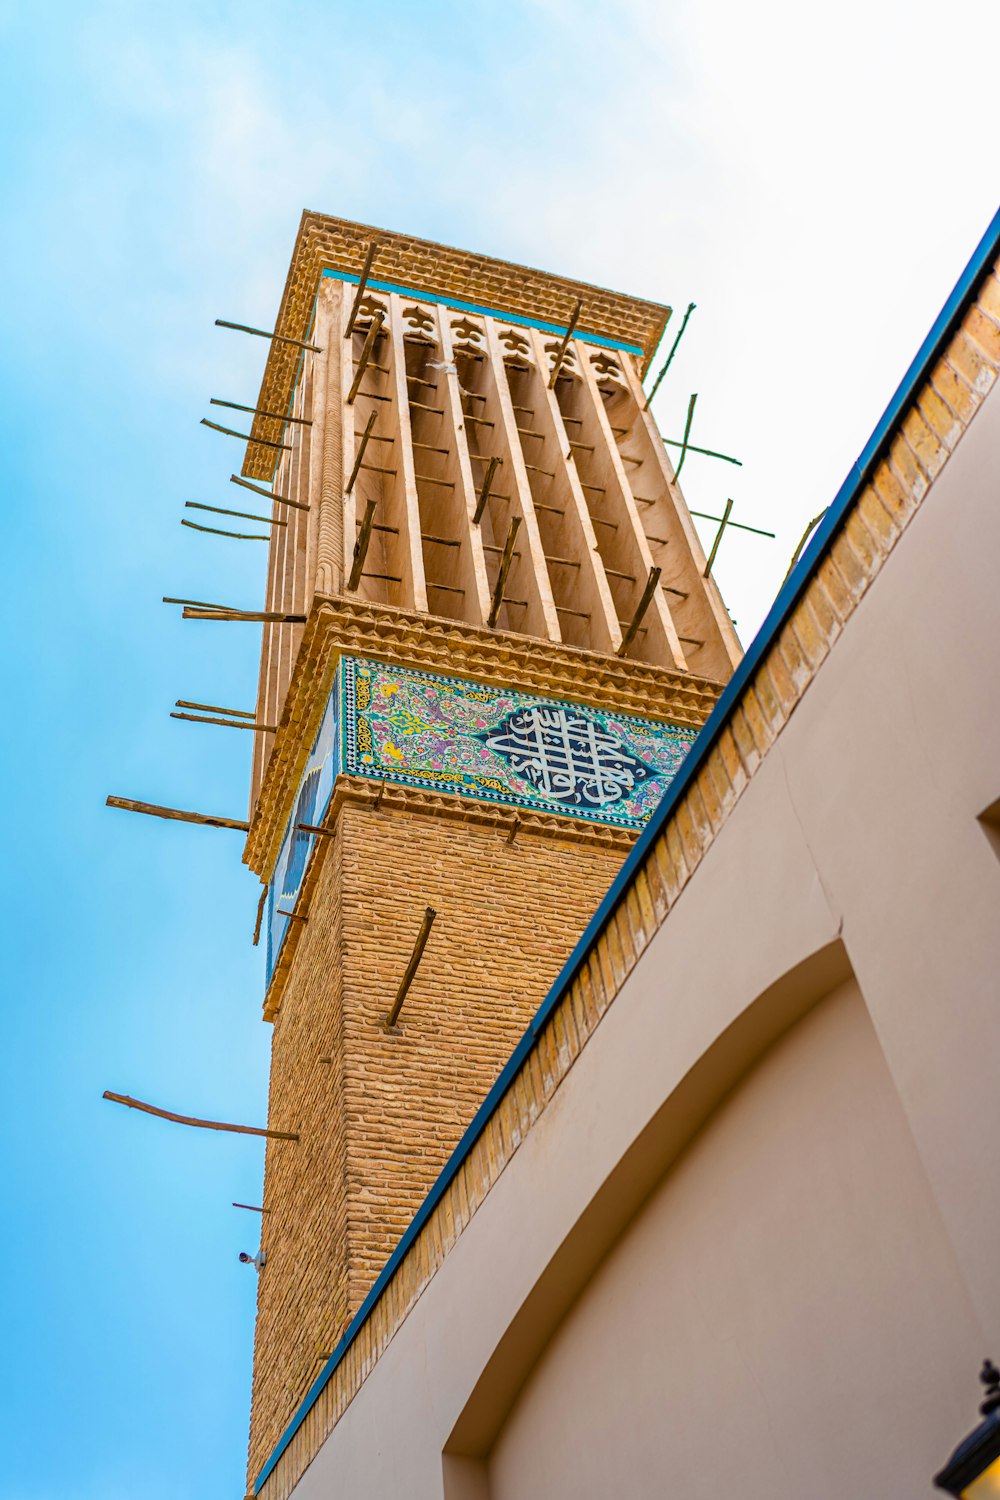 a tall brick clock tower with a sky background